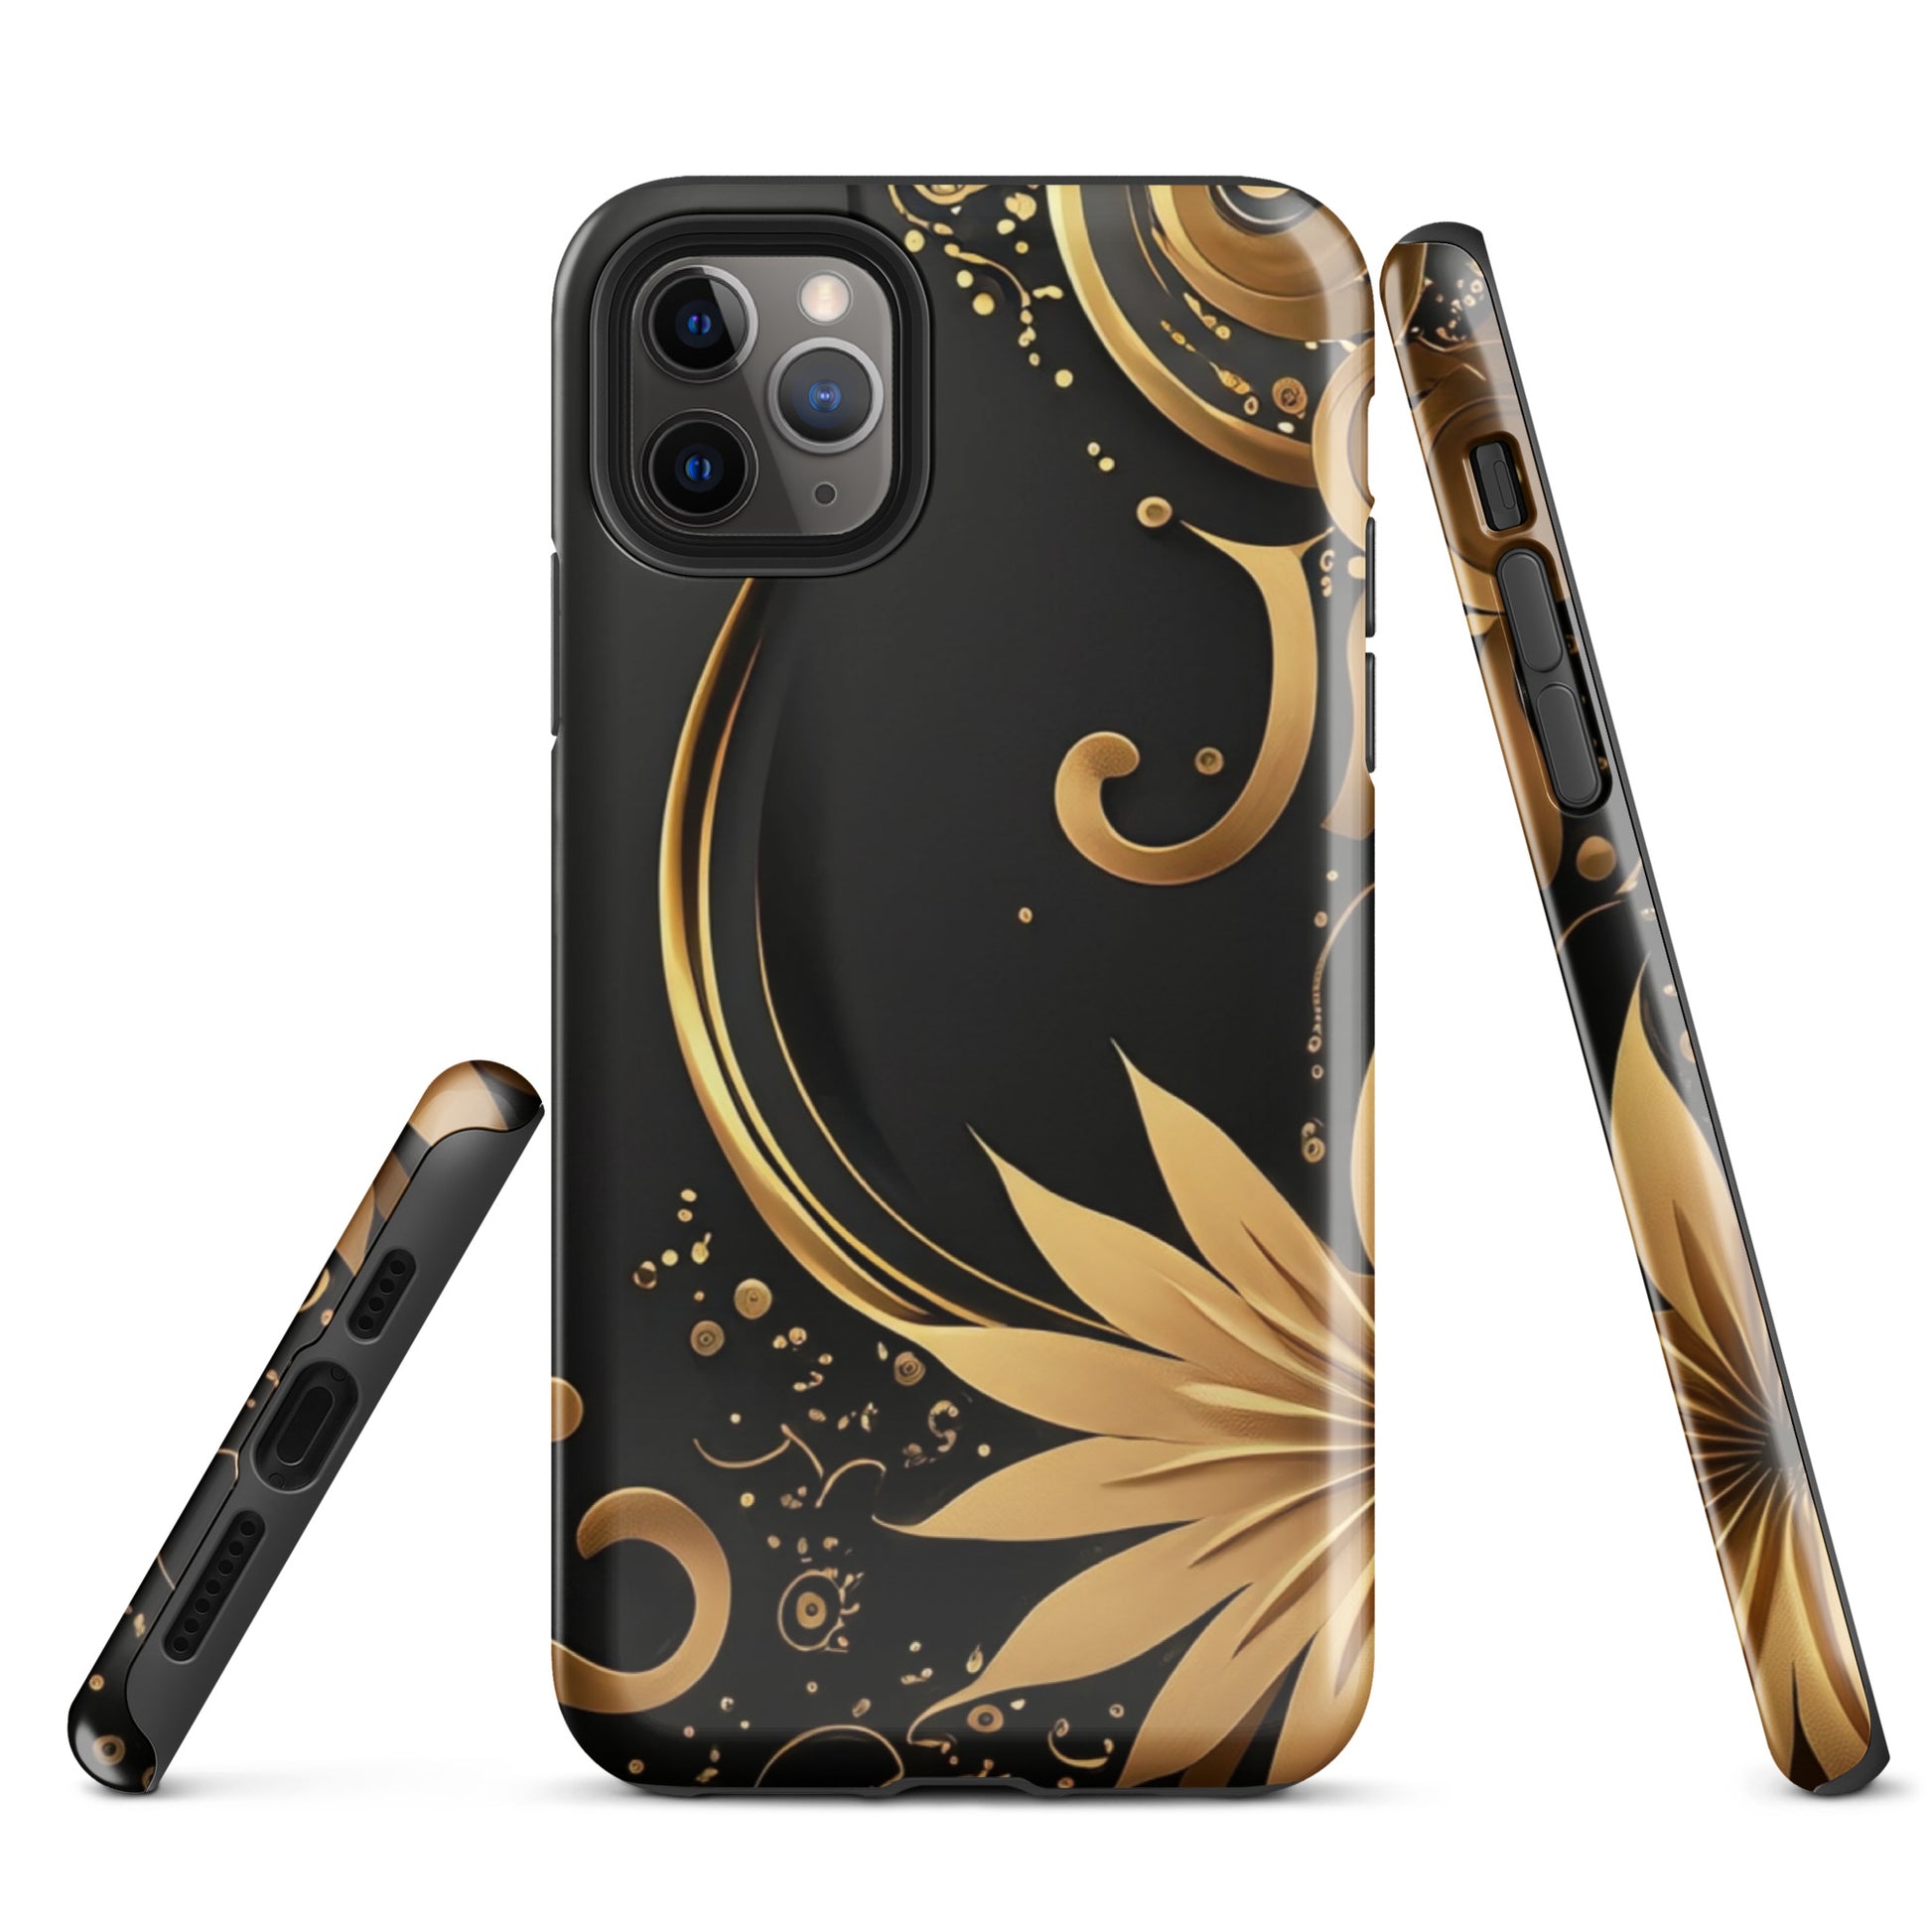 A Golden Flower Case for the iPhone 11 Pro Max